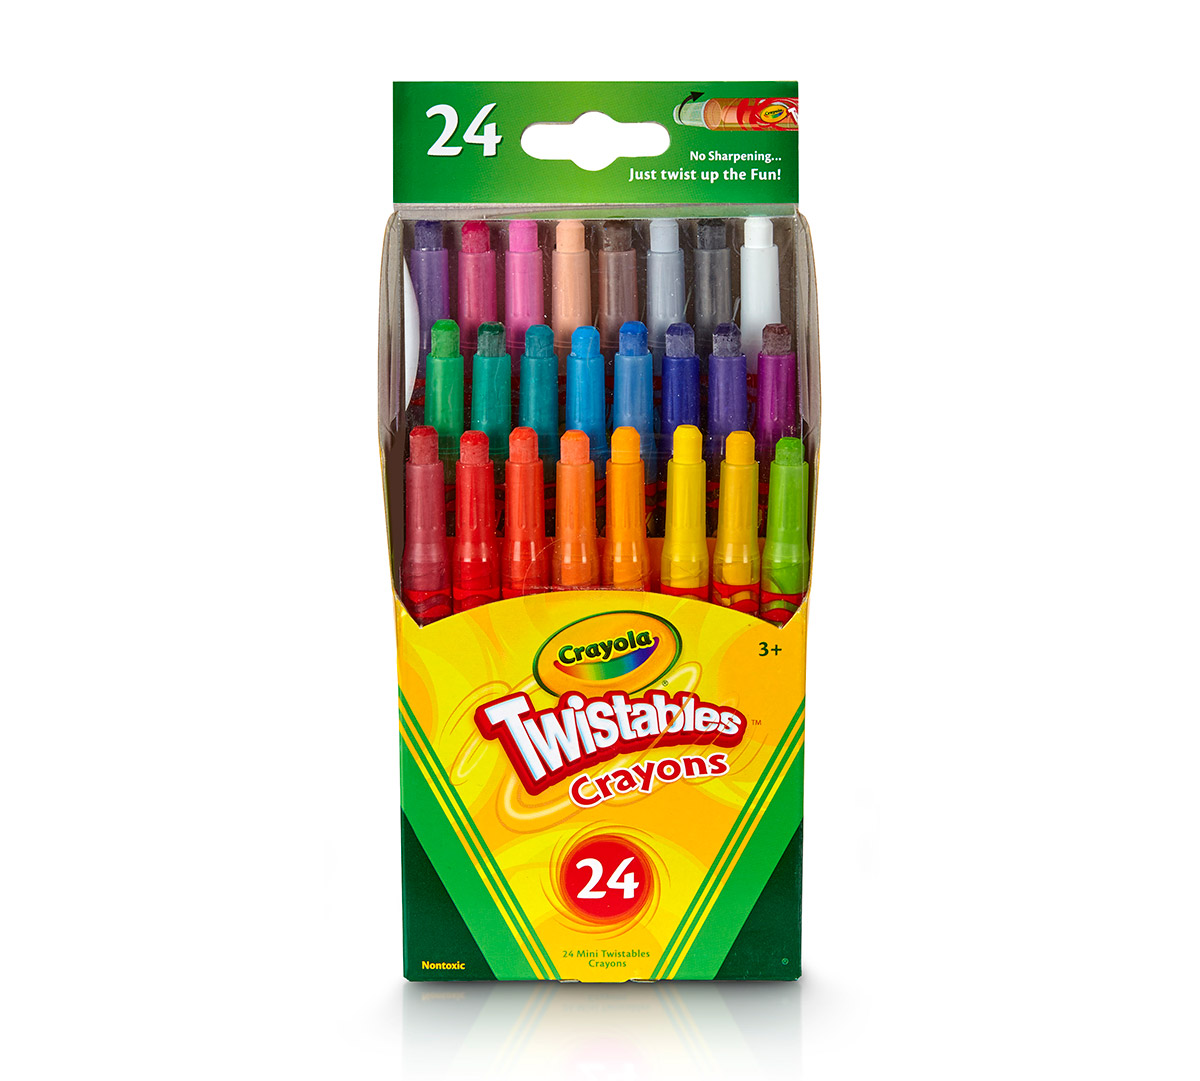 CRAYONS, Crayola 8 Ct. Twistable long Extreme Colors